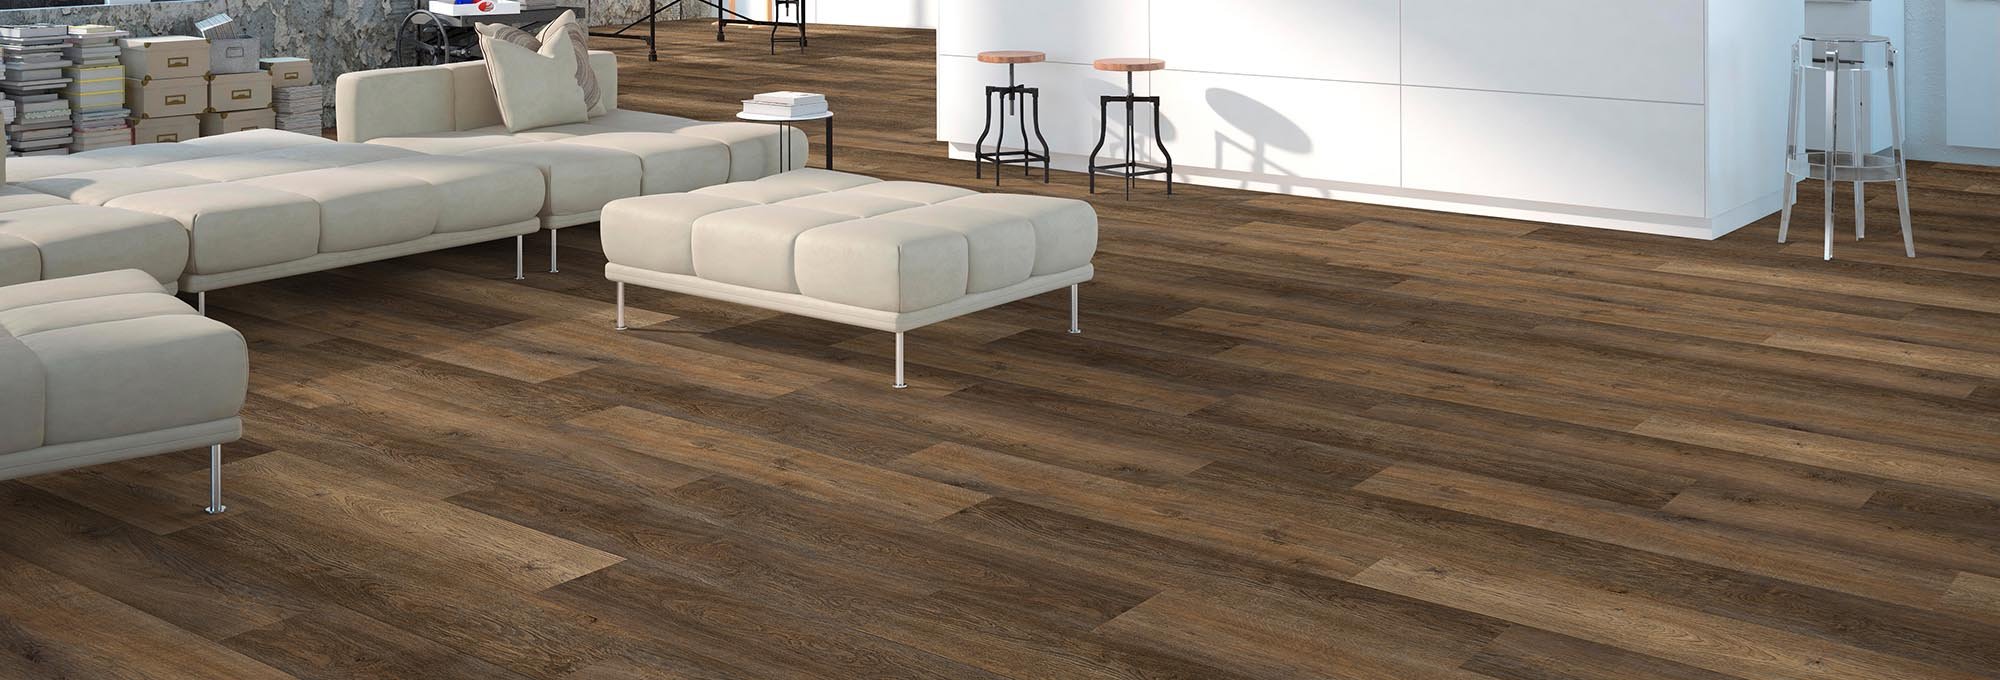 Shop Flooring Products from CarpetsPlus COLORTILE of New York in Congers, NY